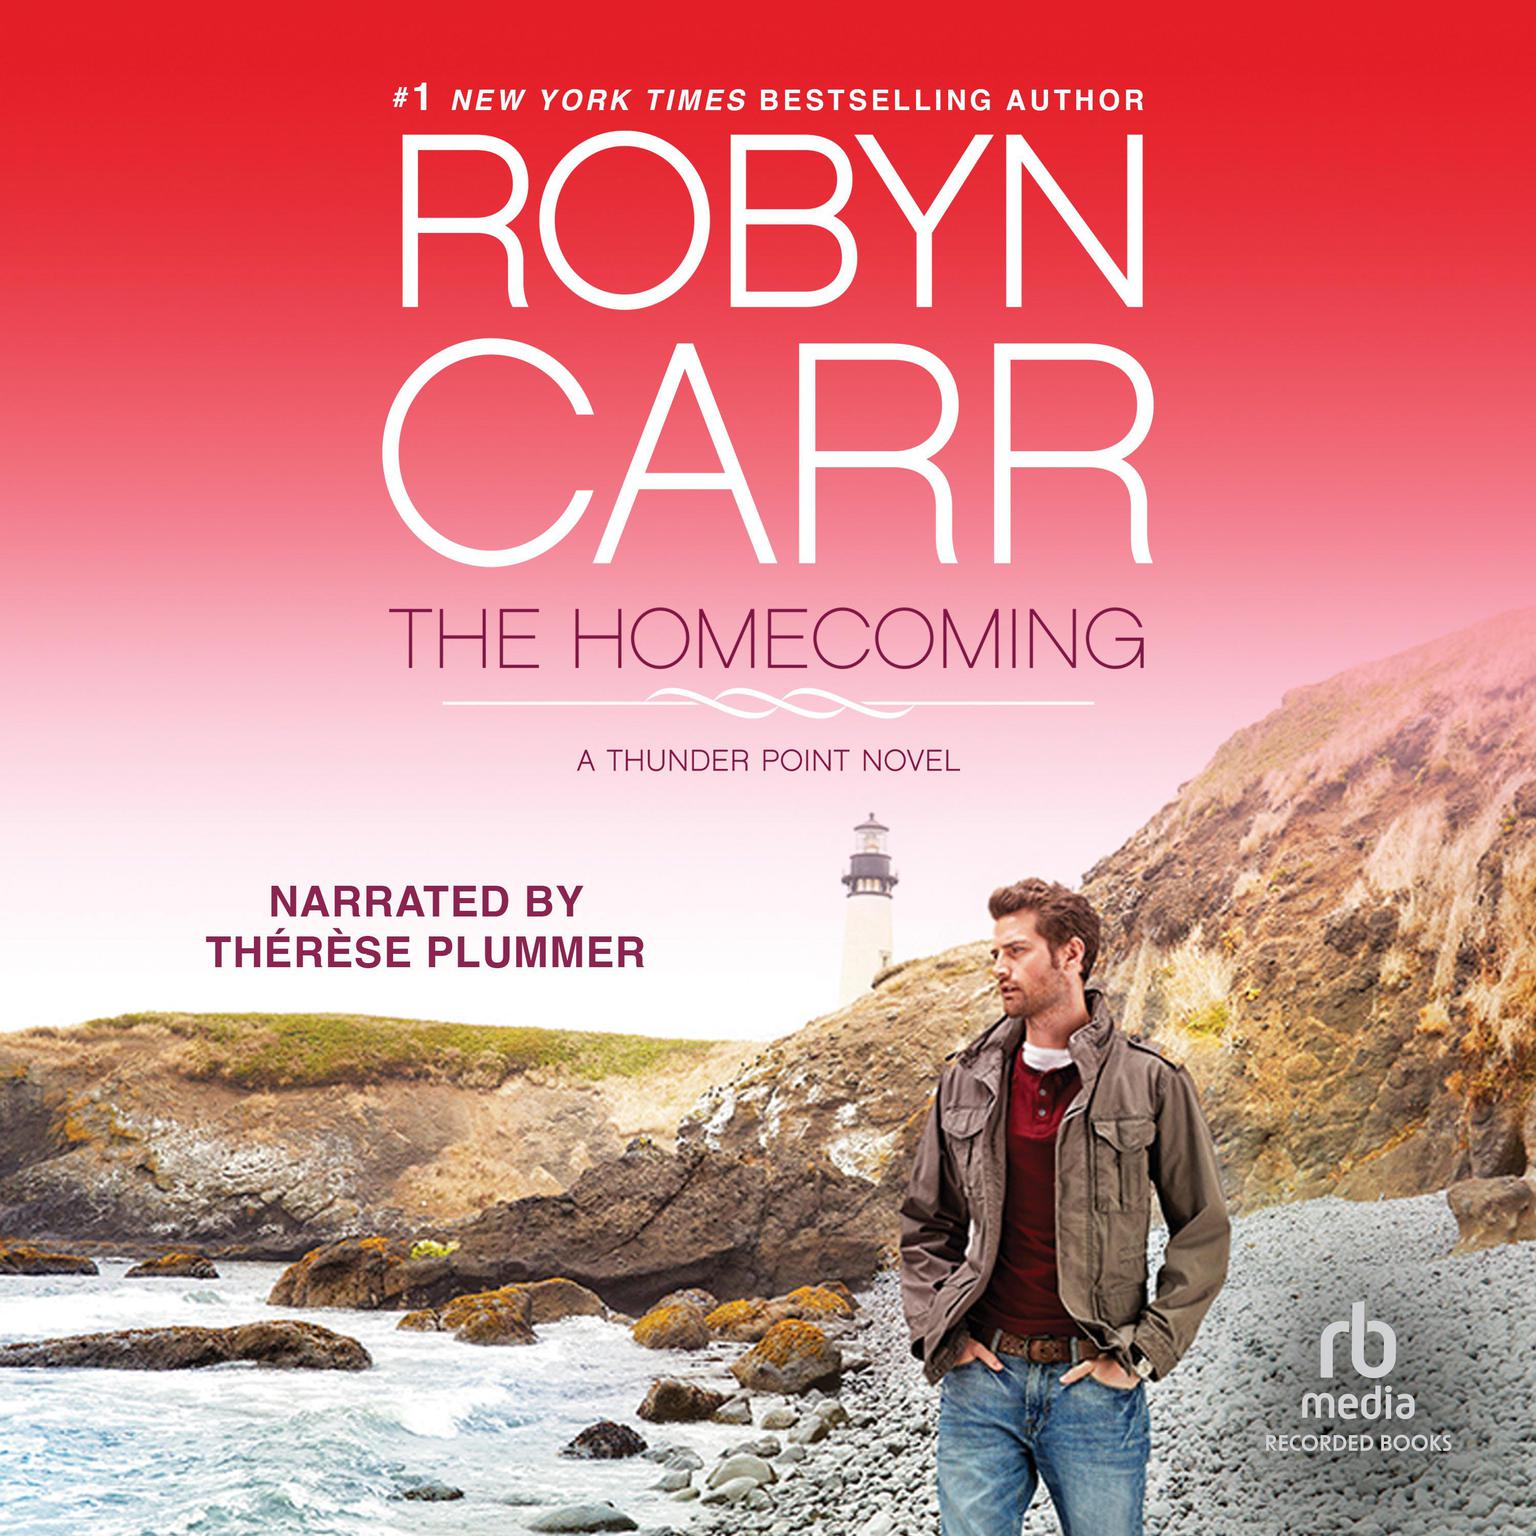 The Homecoming: A Thunder Point Novel Audiobook, by Robyn Carr